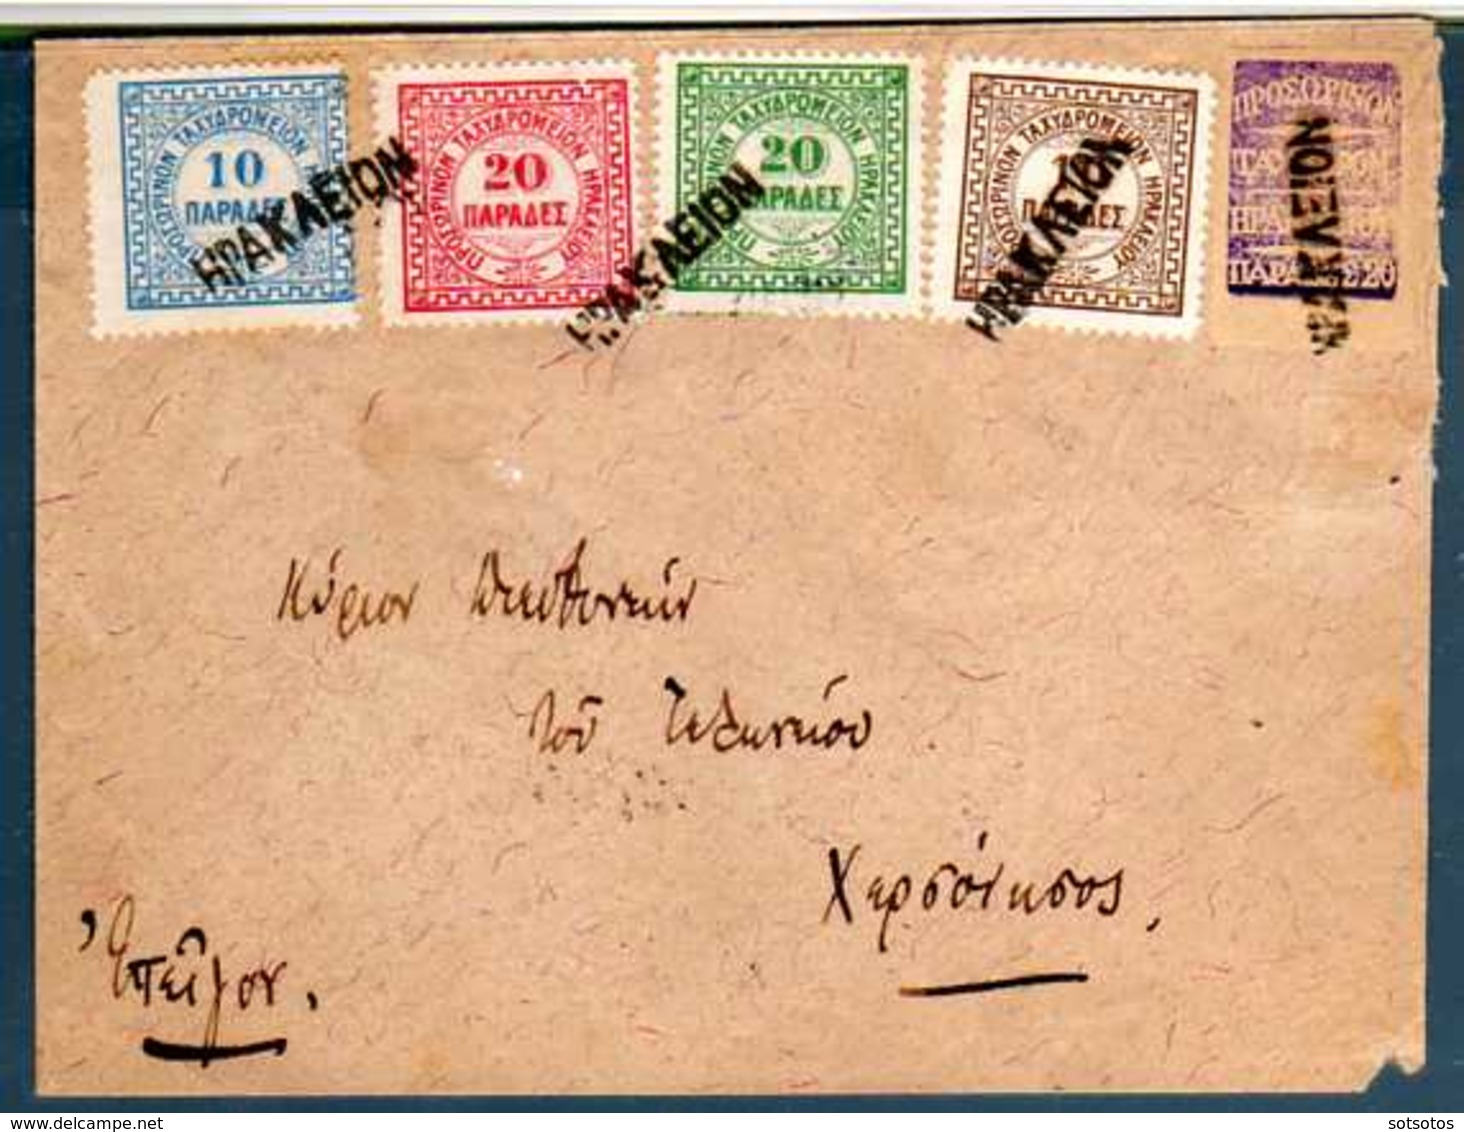 CRETE 1898: The Rarest Cover Of Cretan Post Offices, Bearing All 5 Stamps Of The British Post Office In Crete - Crete